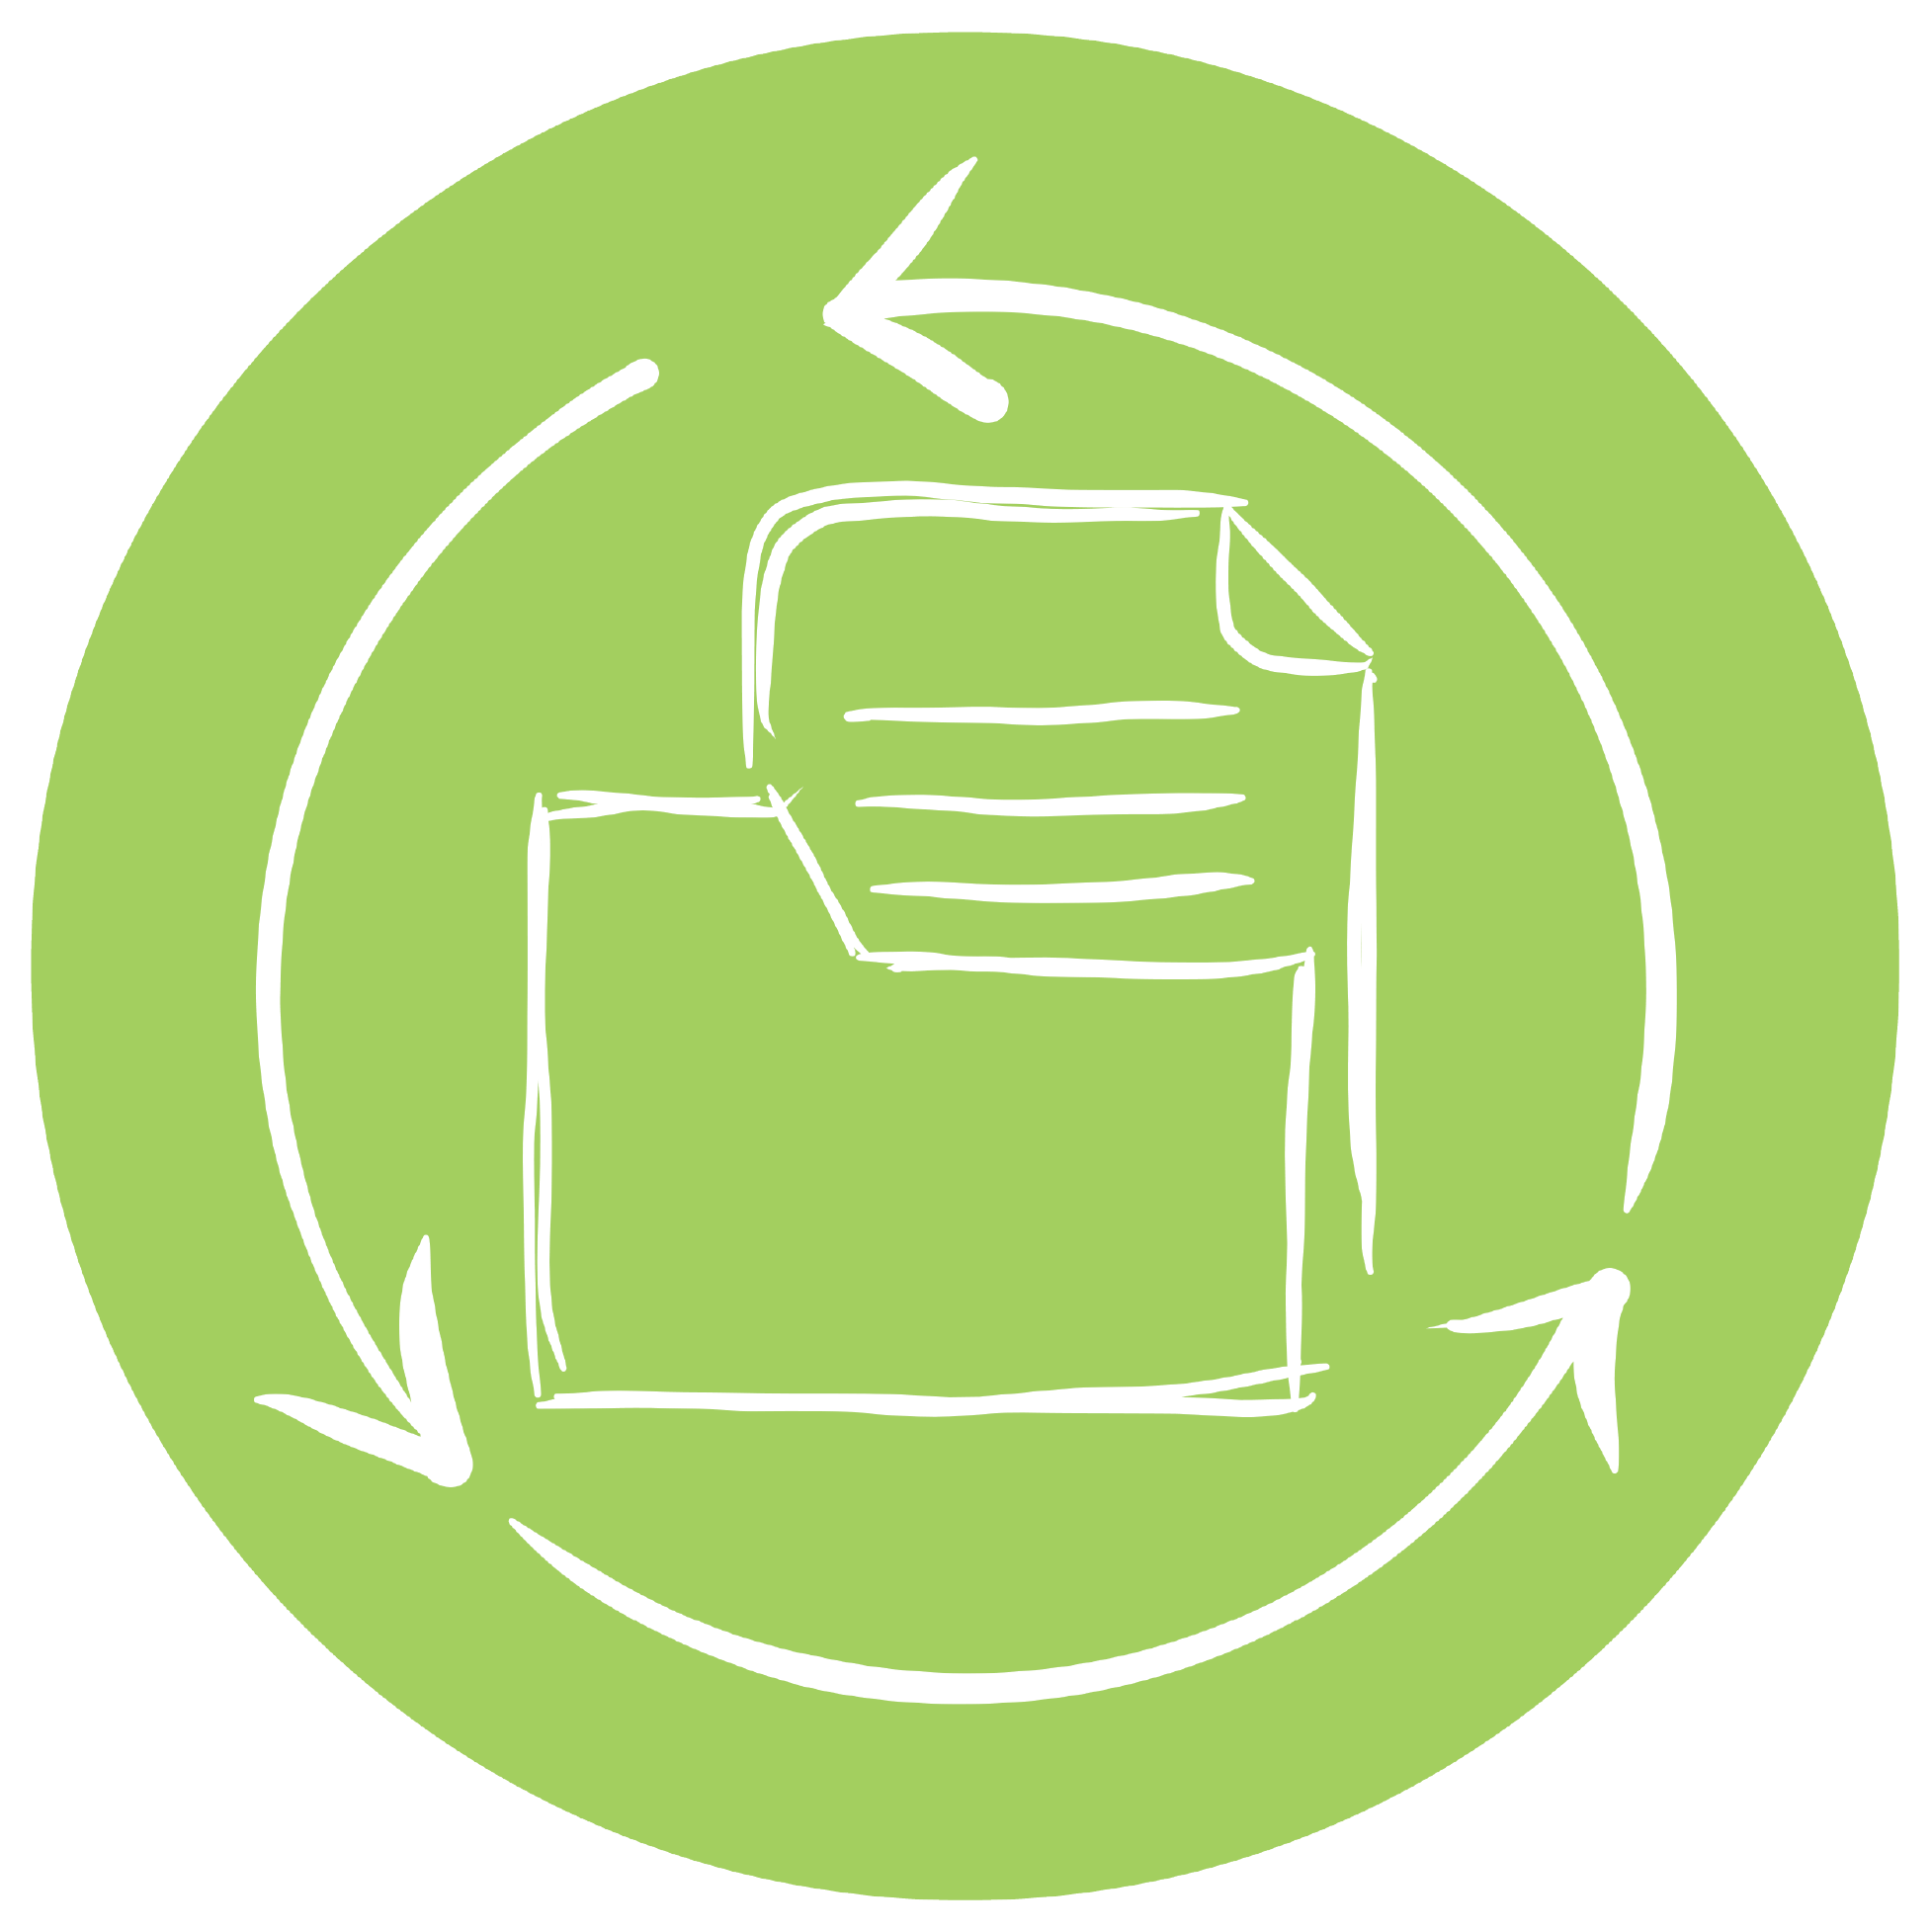 Cycle icon with document in circle